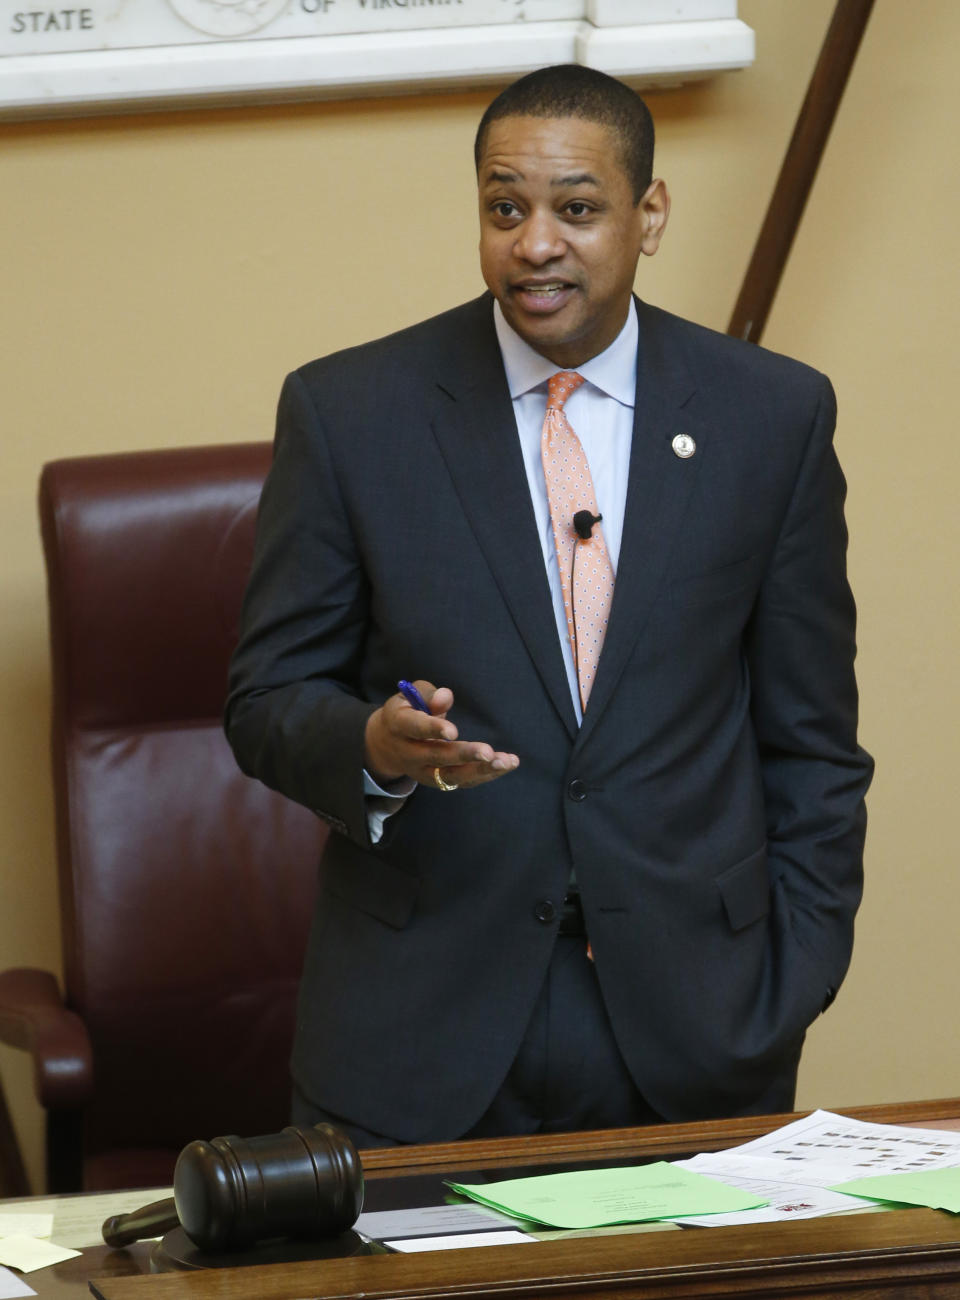 Virginia Lt. Gov. Justin Fairfax presides over a Senate session at the Capitol in Richmond, Va., Friday, Feb. 22, 2019. The chairman of the House Courts of Justice committee announced that they will hold a hearing on the sexual accusations that have been placed against Fairfax. (AP Photo/Steve Helber)